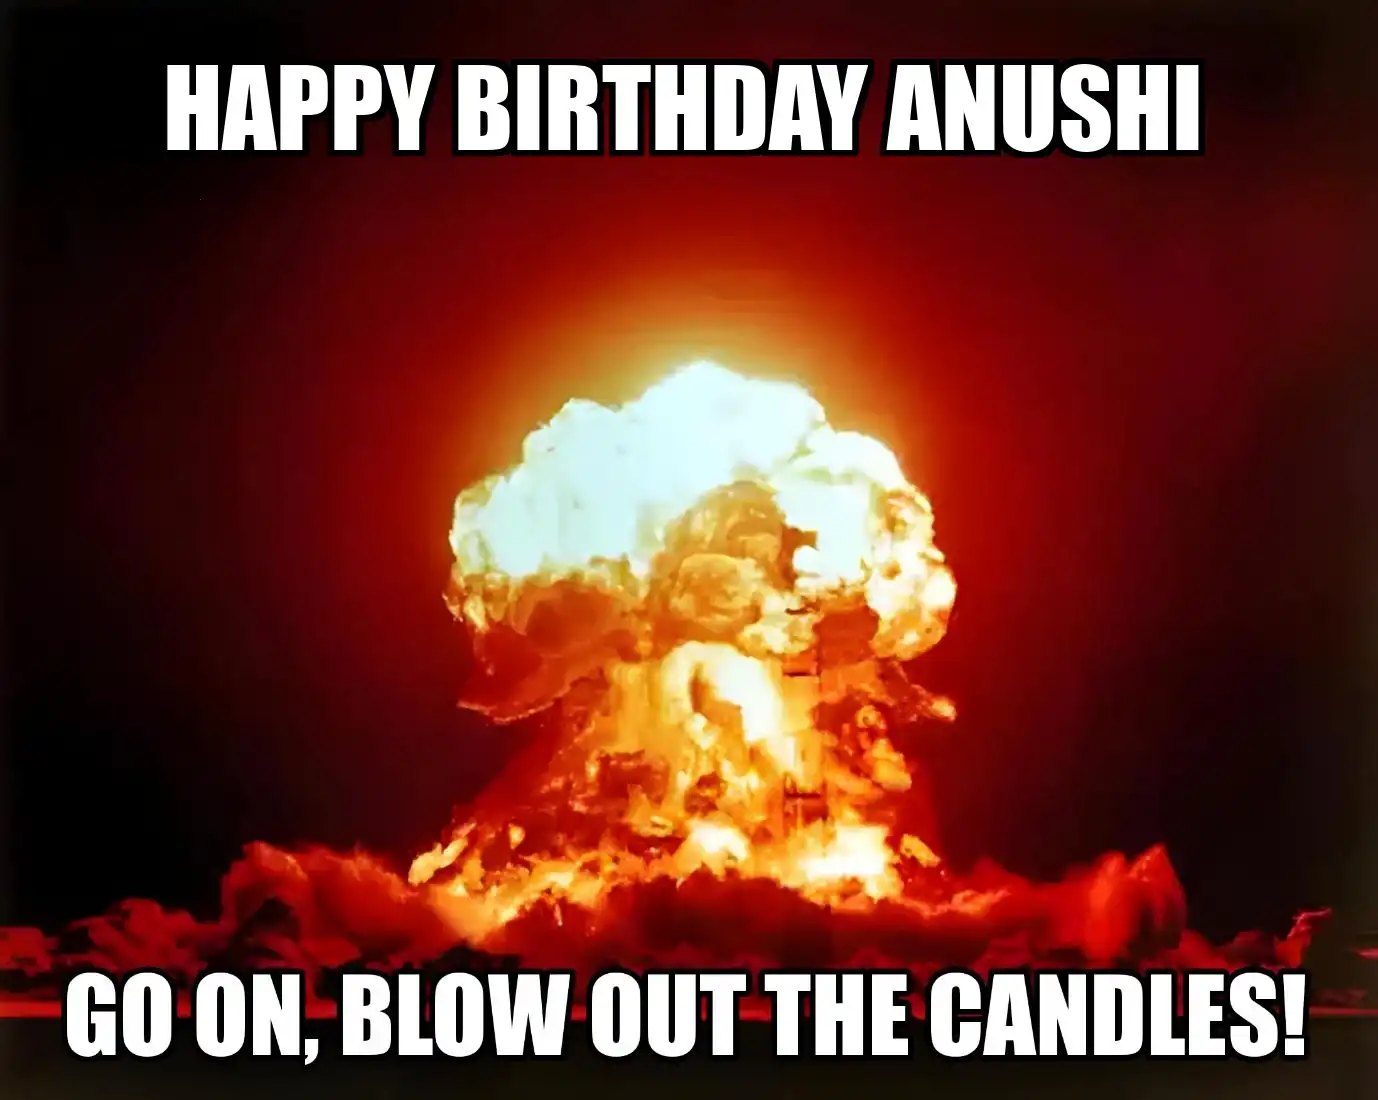 Happy Birthday Anushi Go On Blow Out The Candles Meme